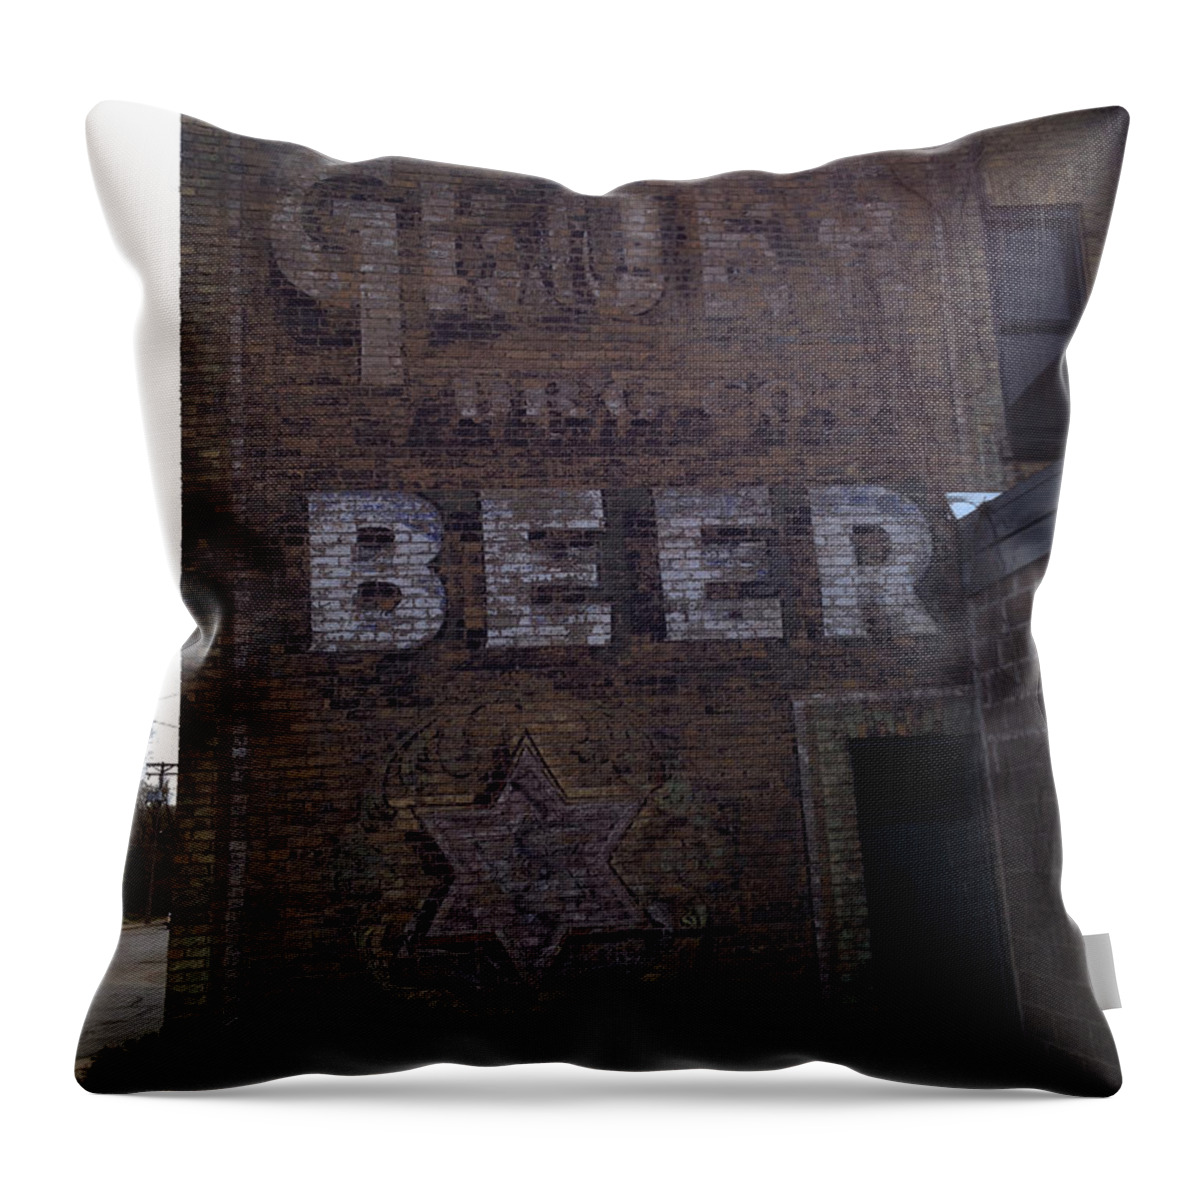 Beer Throw Pillow featuring the photograph Gluek Beer by Tim Nyberg